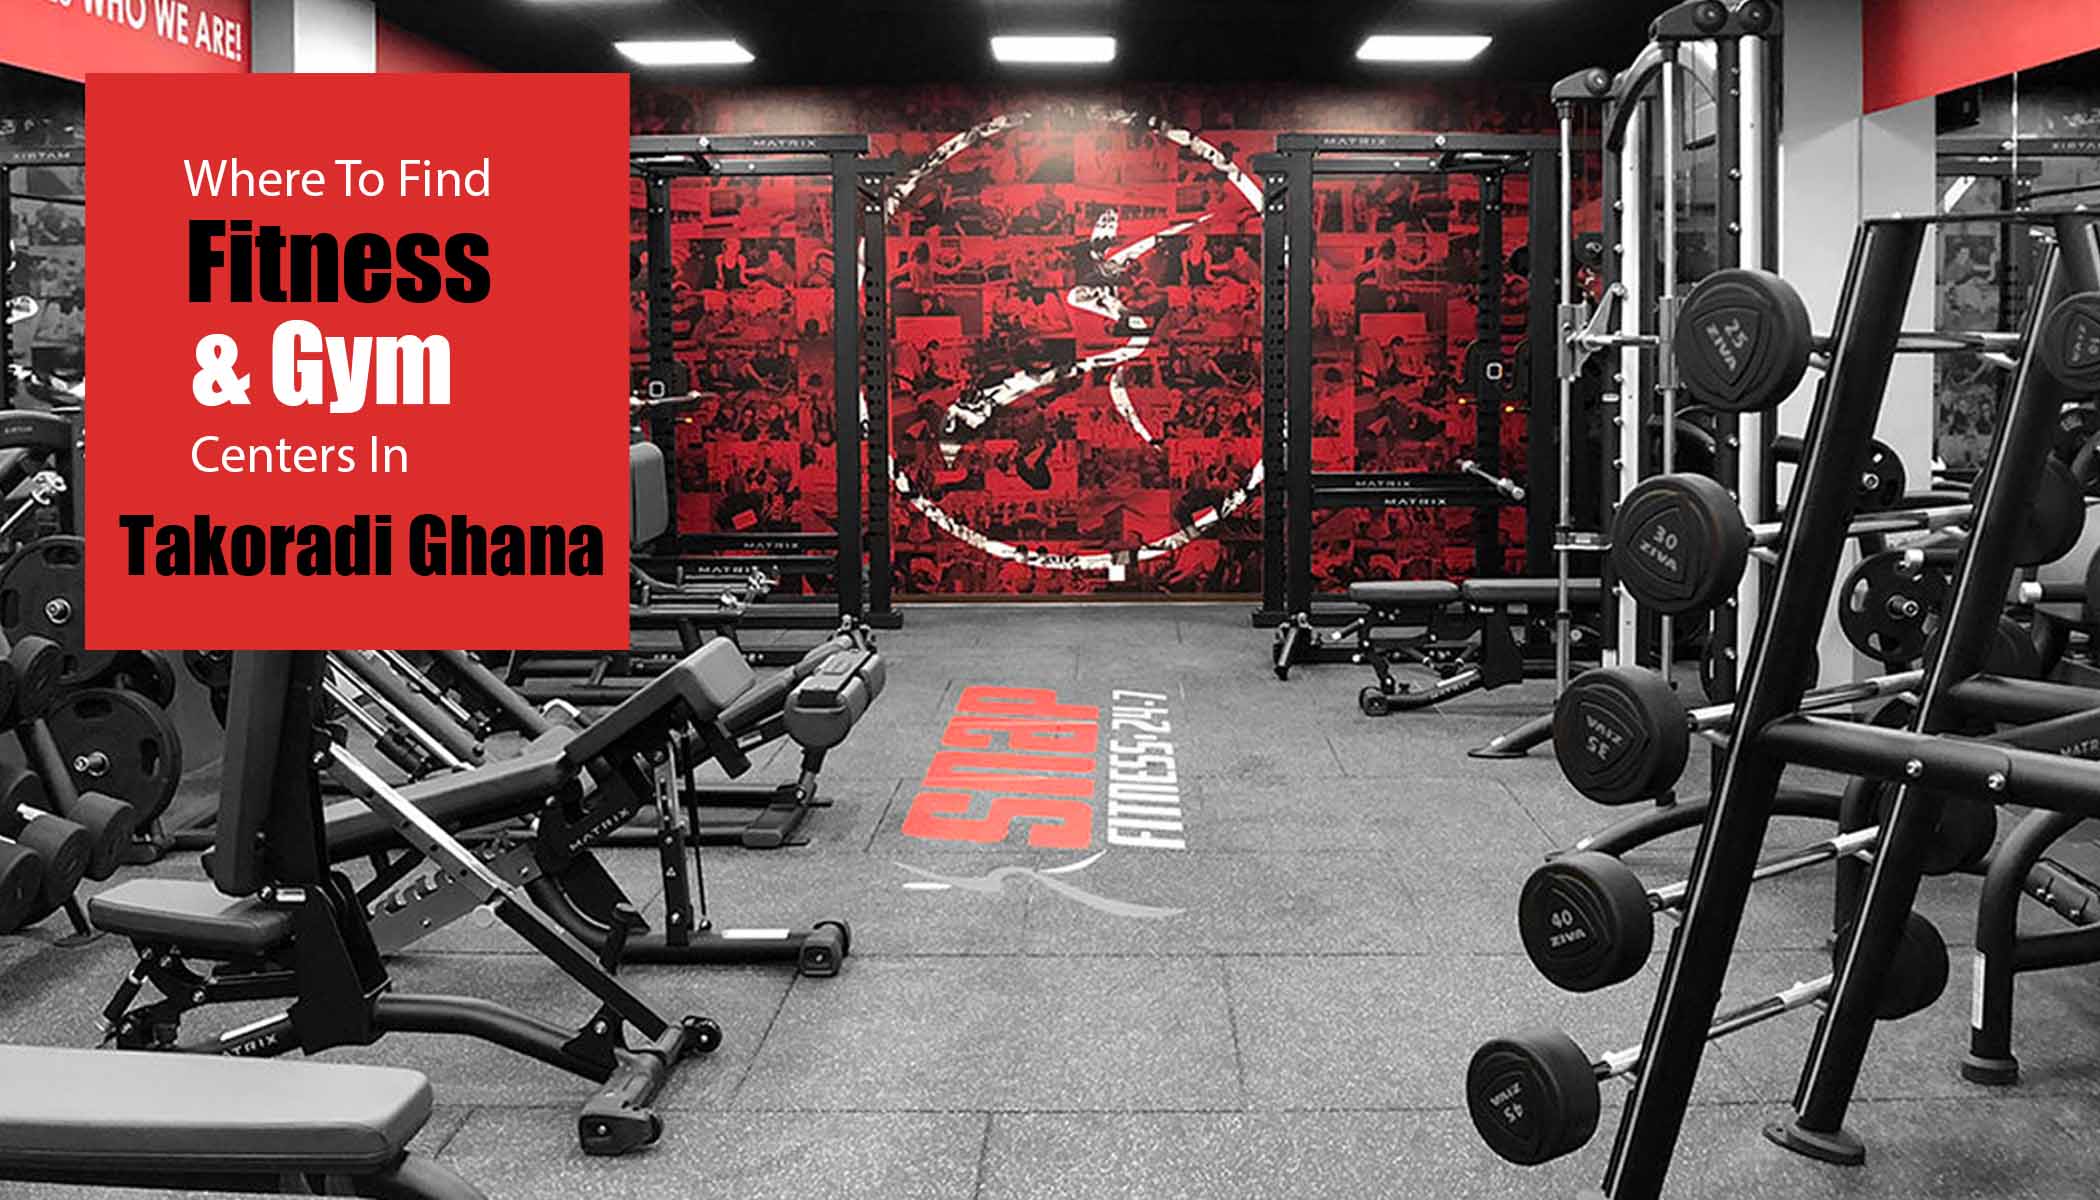 Where to Find Fitness and Gym Centers in Takoradi Ghana